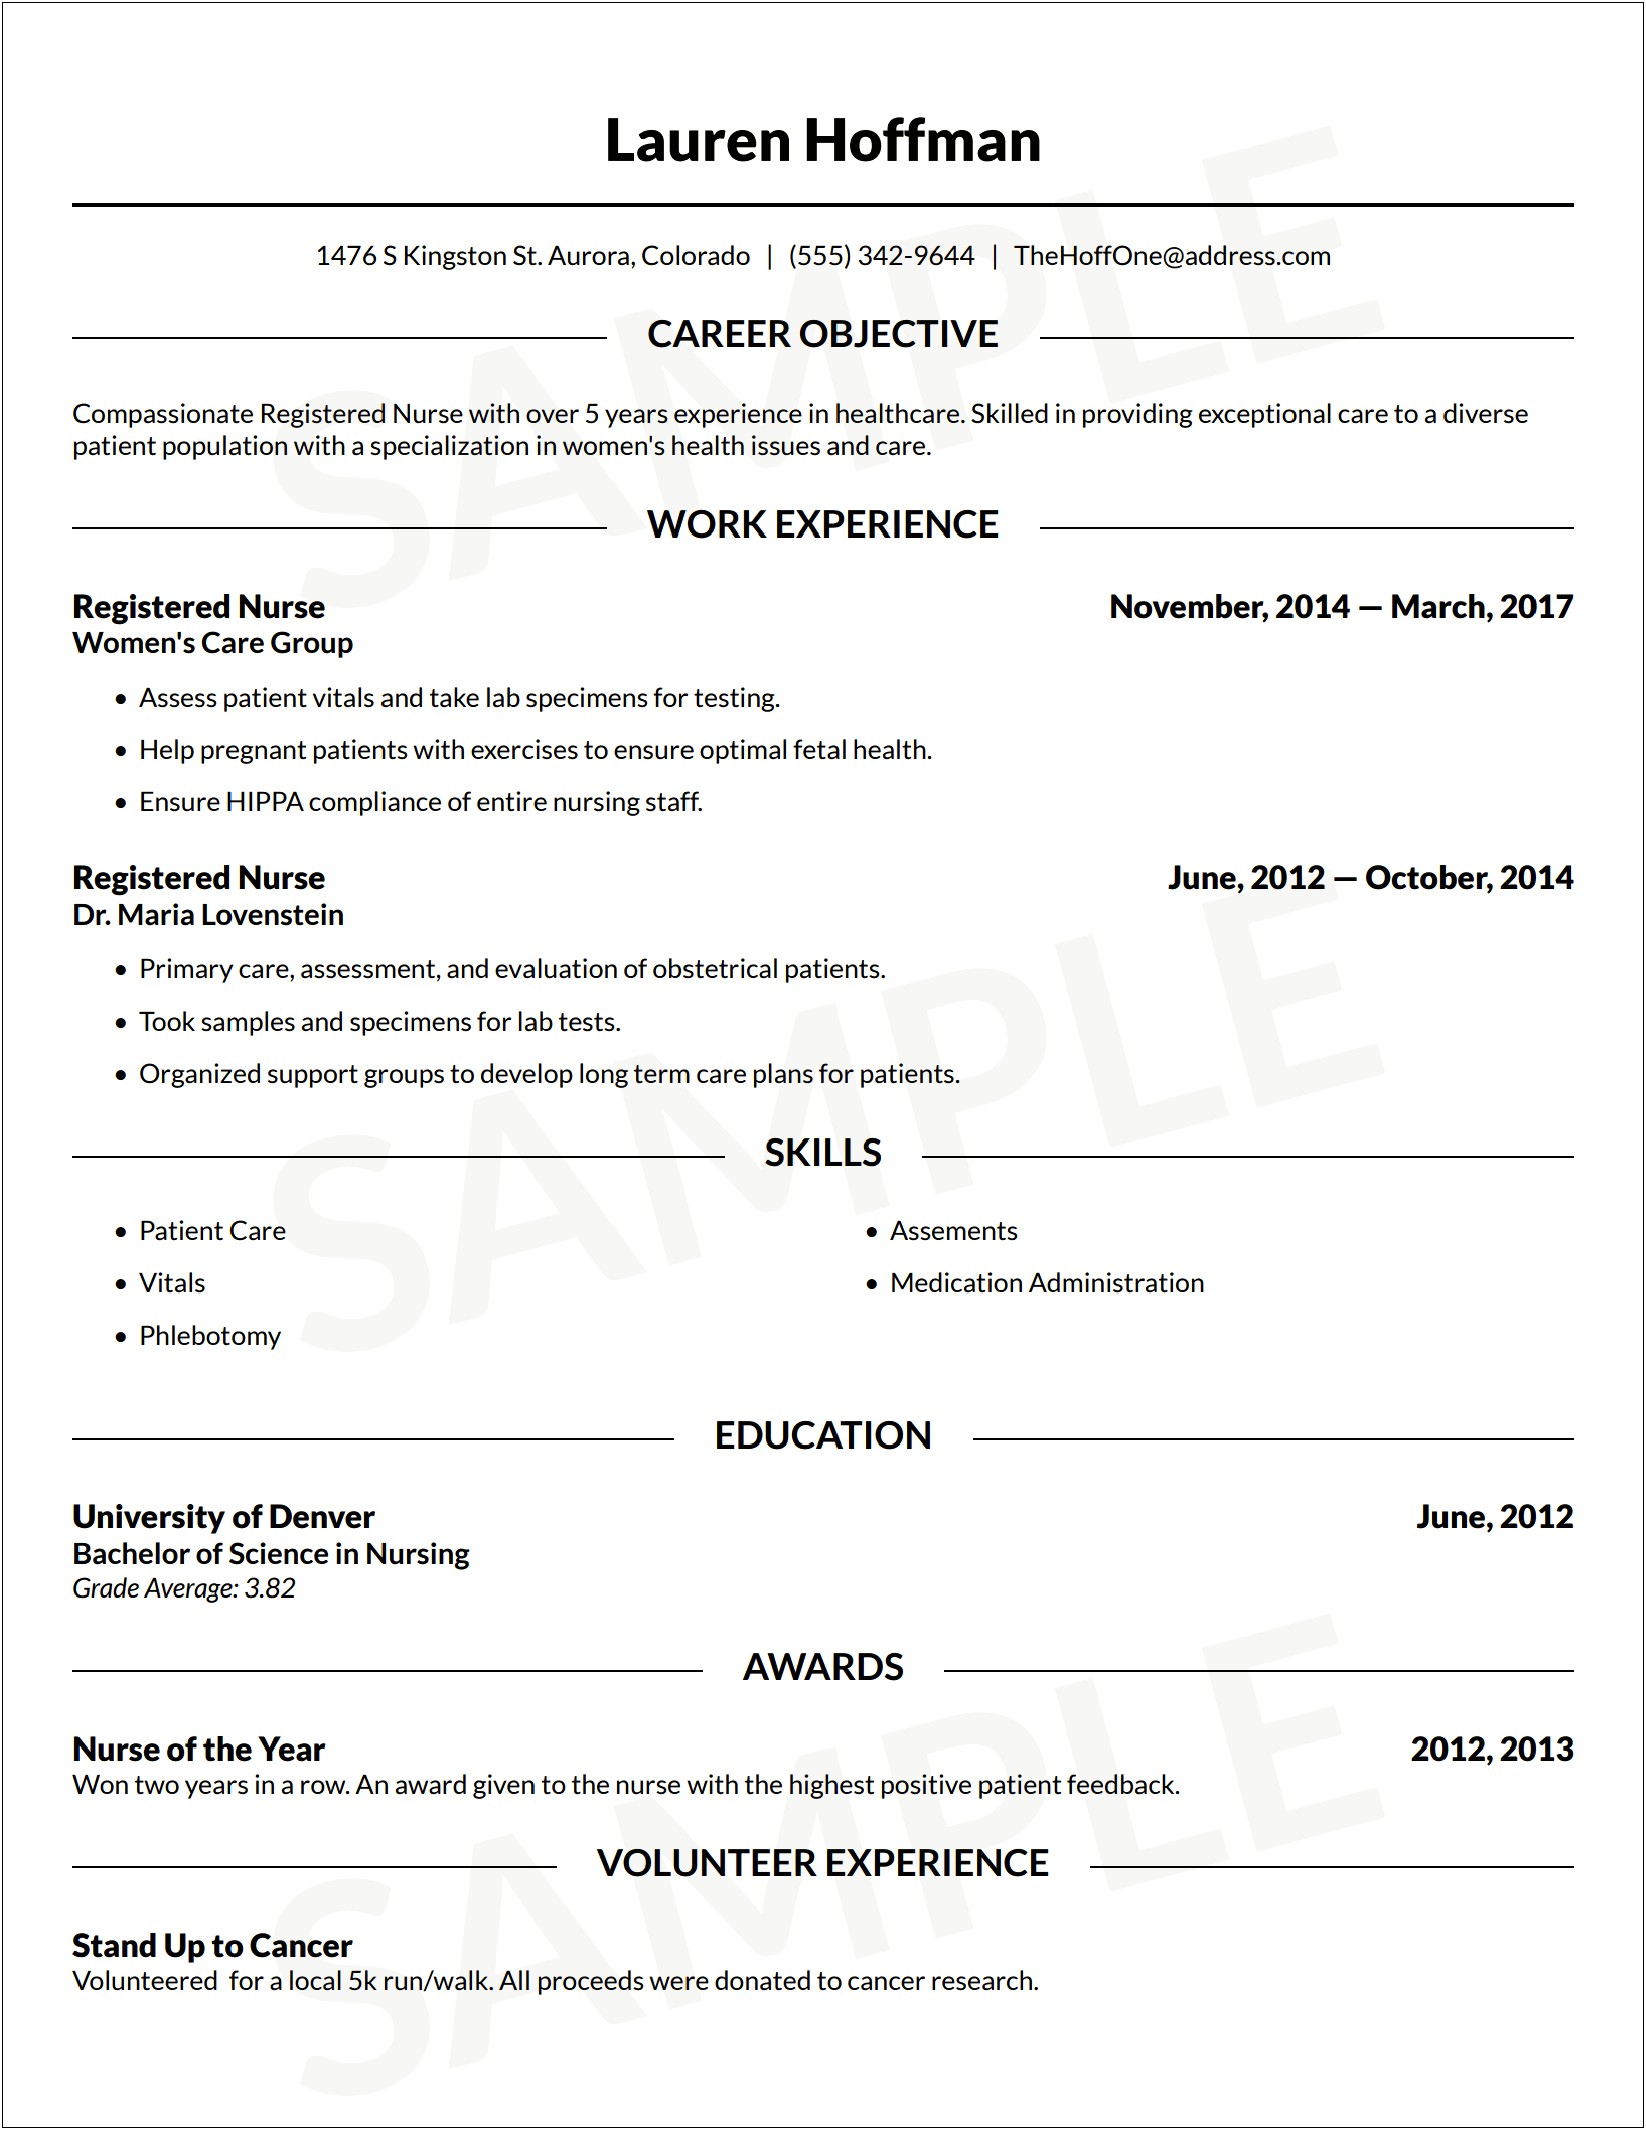 Resume Creator Free Online For Highschool Students